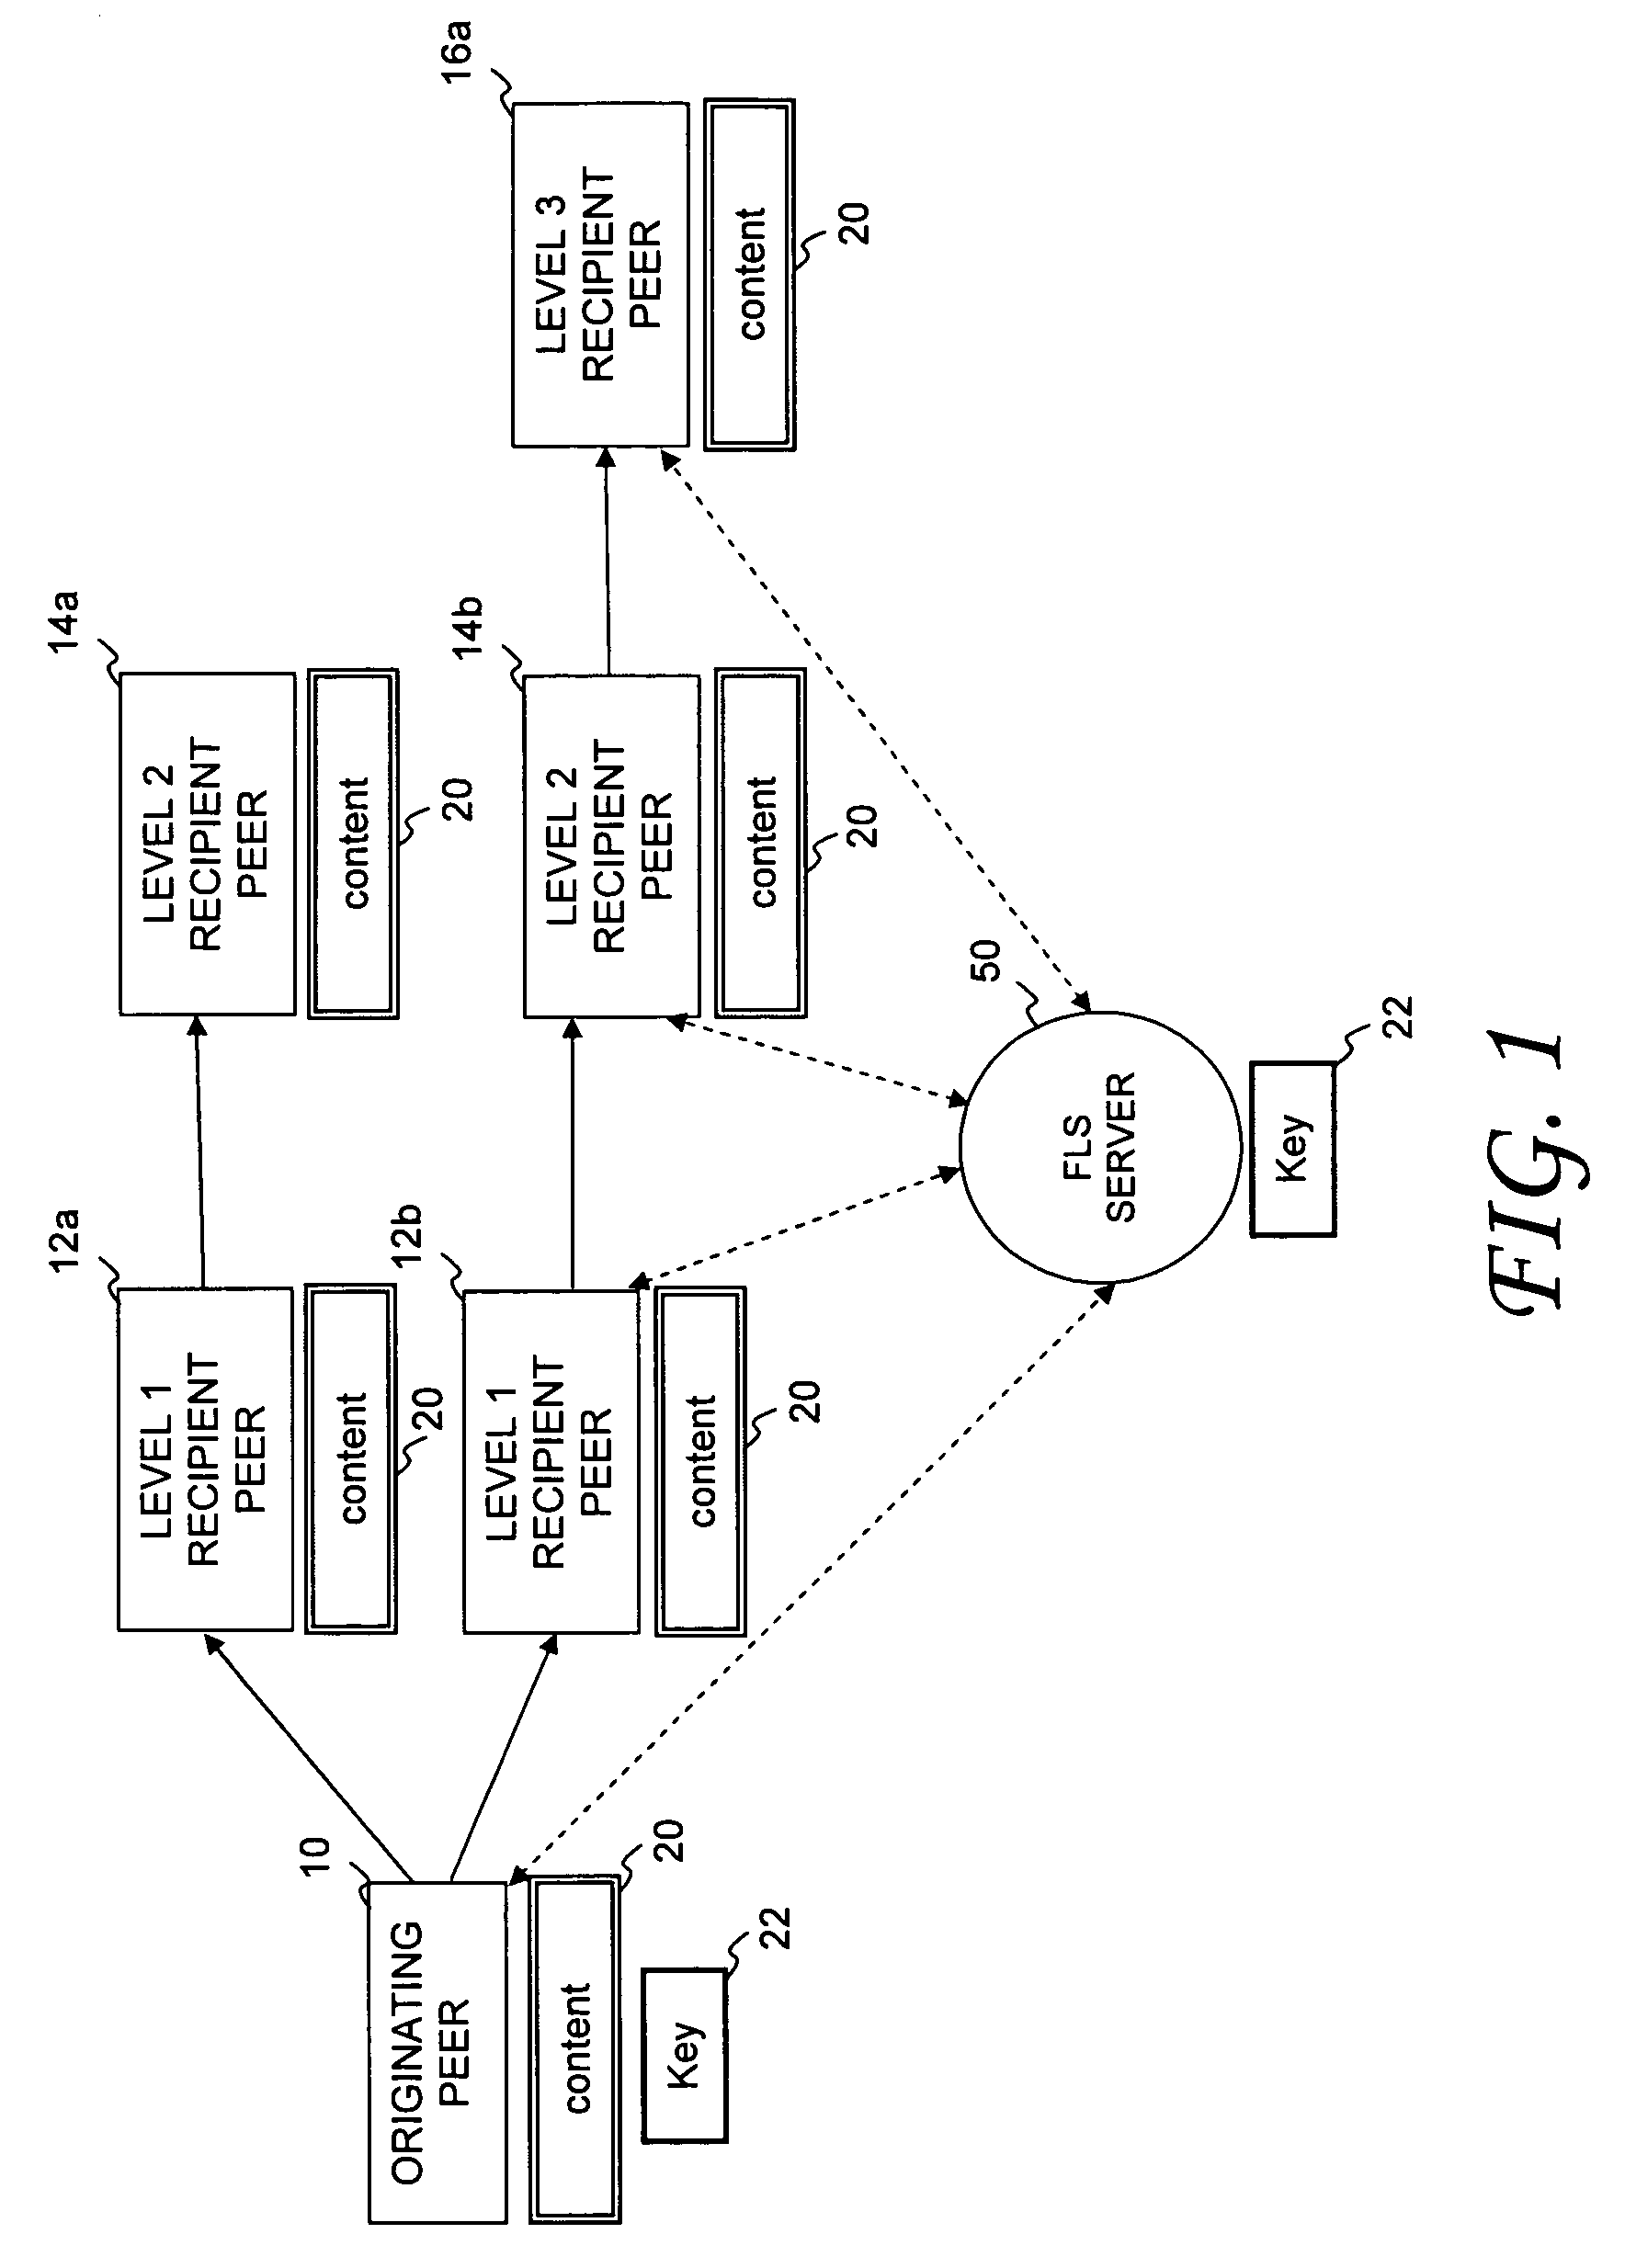 System and method of using a proxy server to manage lazy content distribution in a social network